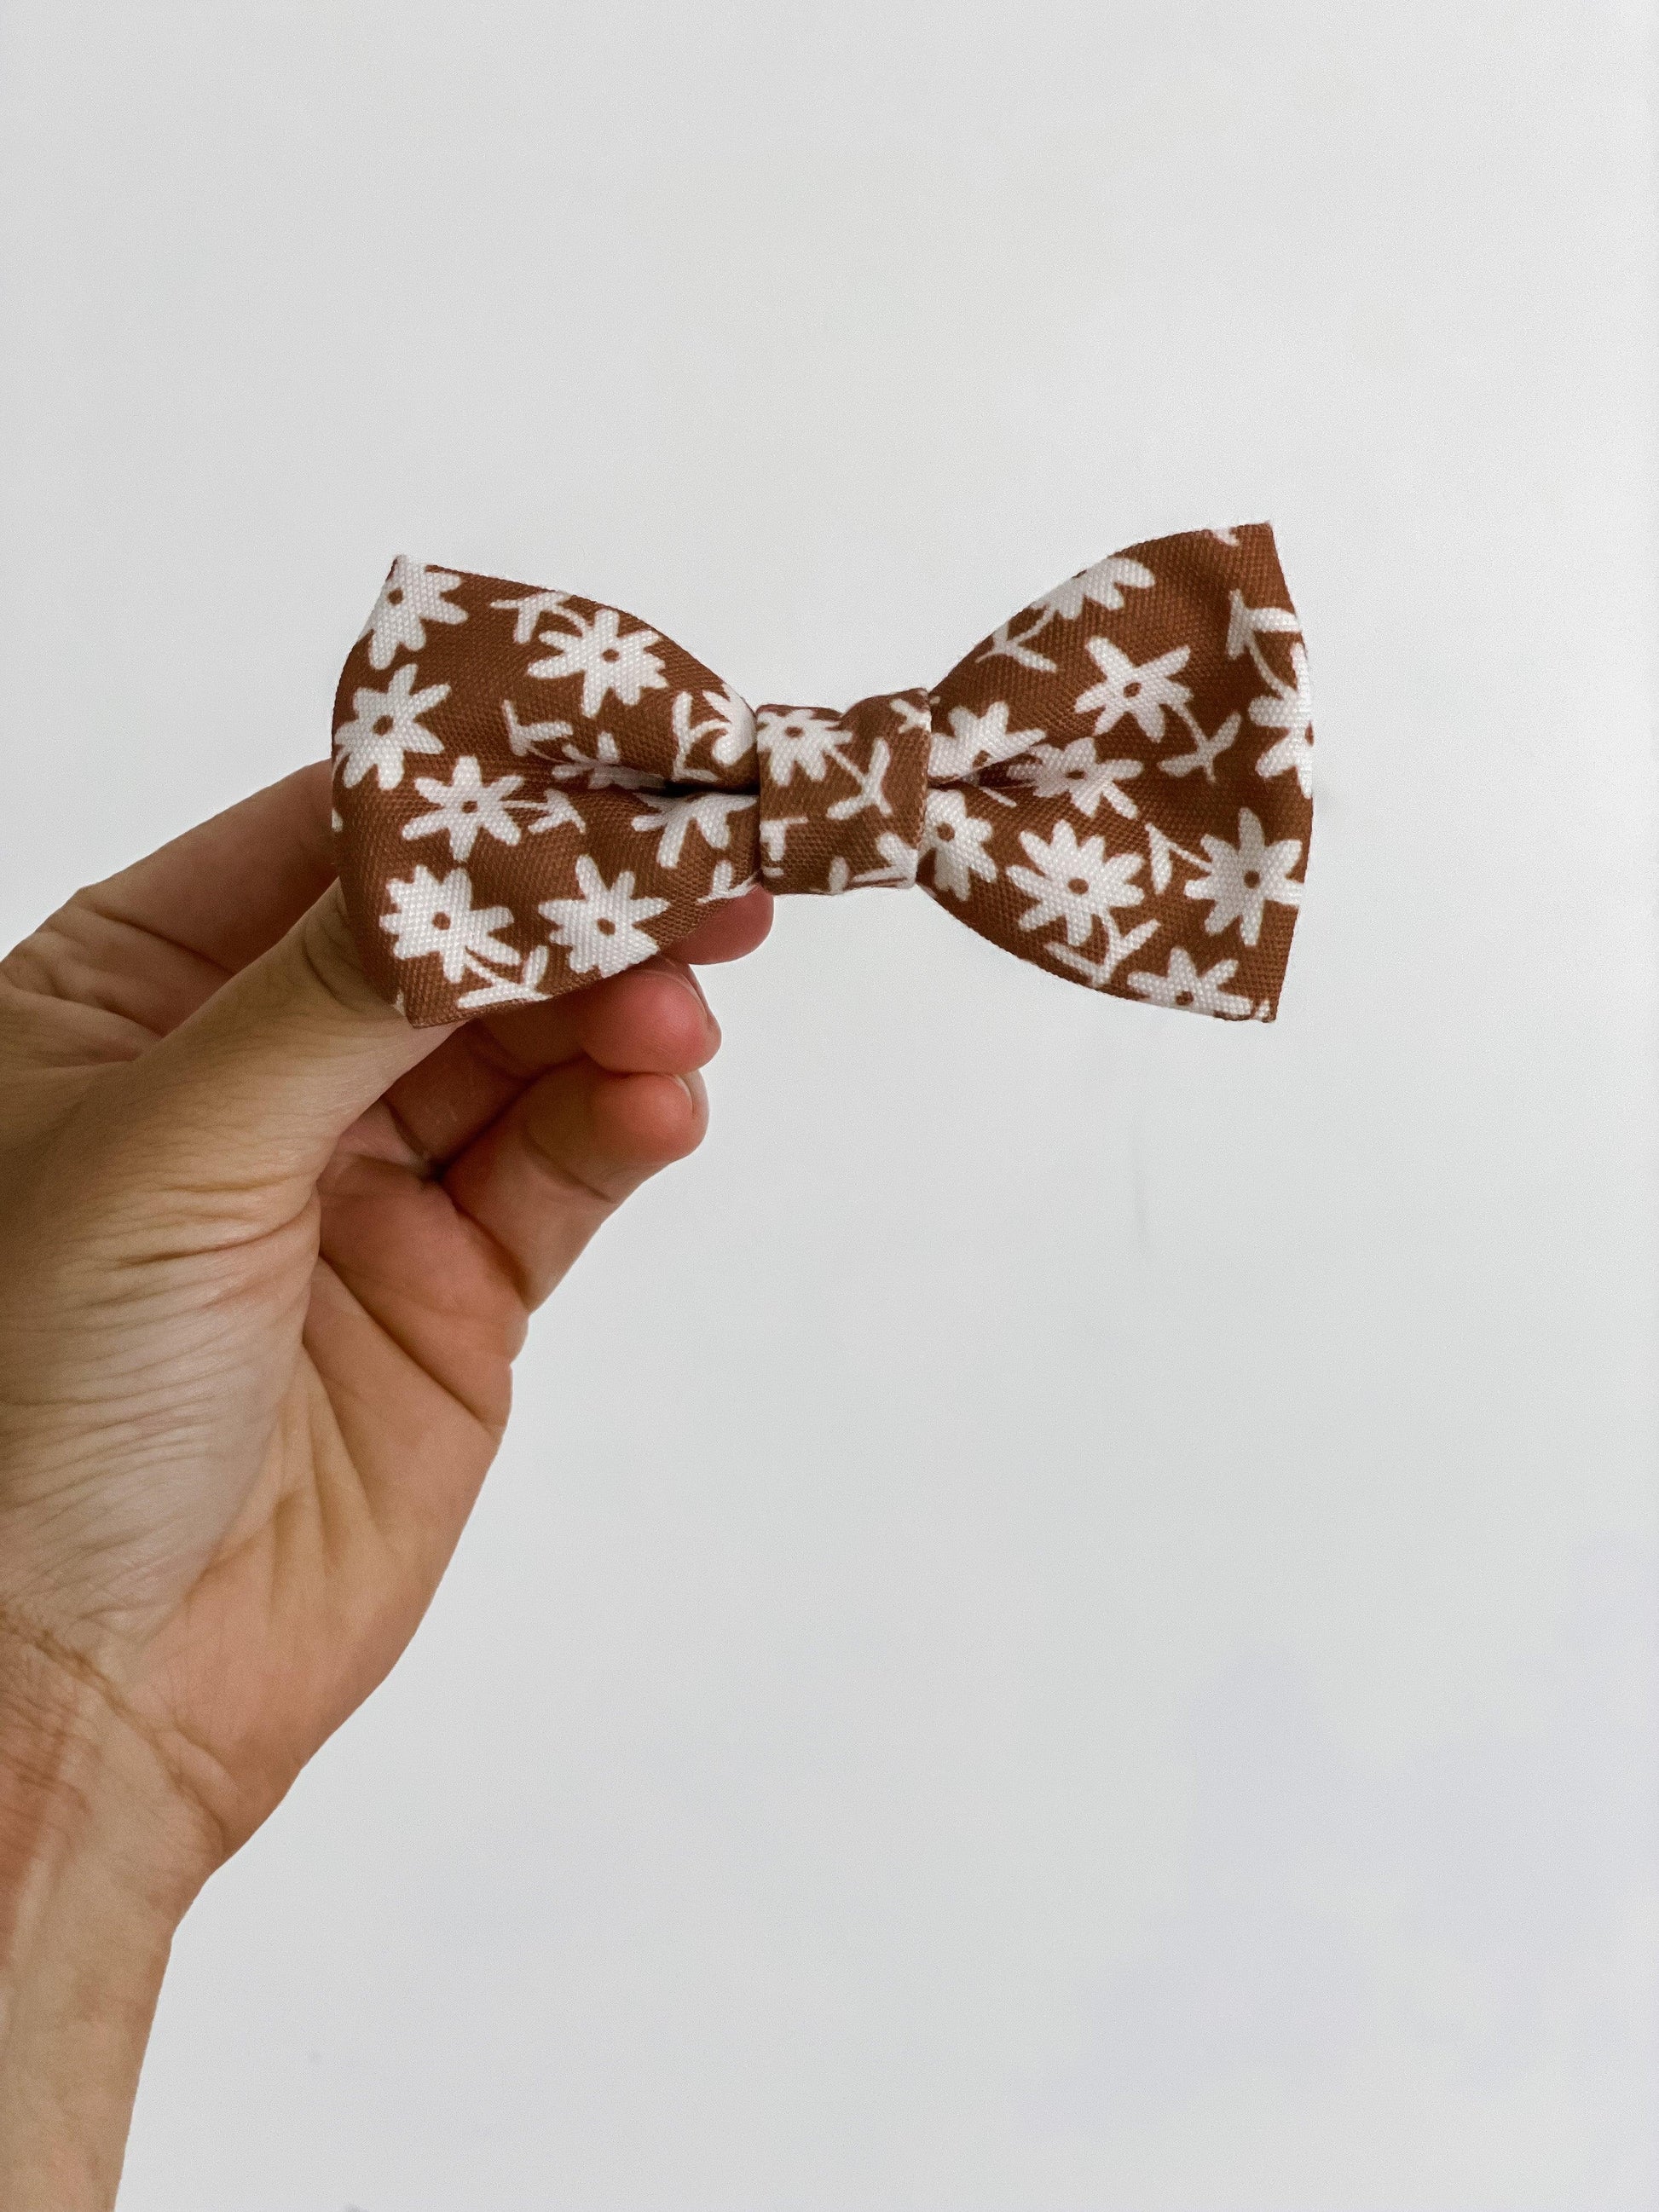 Dog Bow tie - Bloom me away - Woof Frills